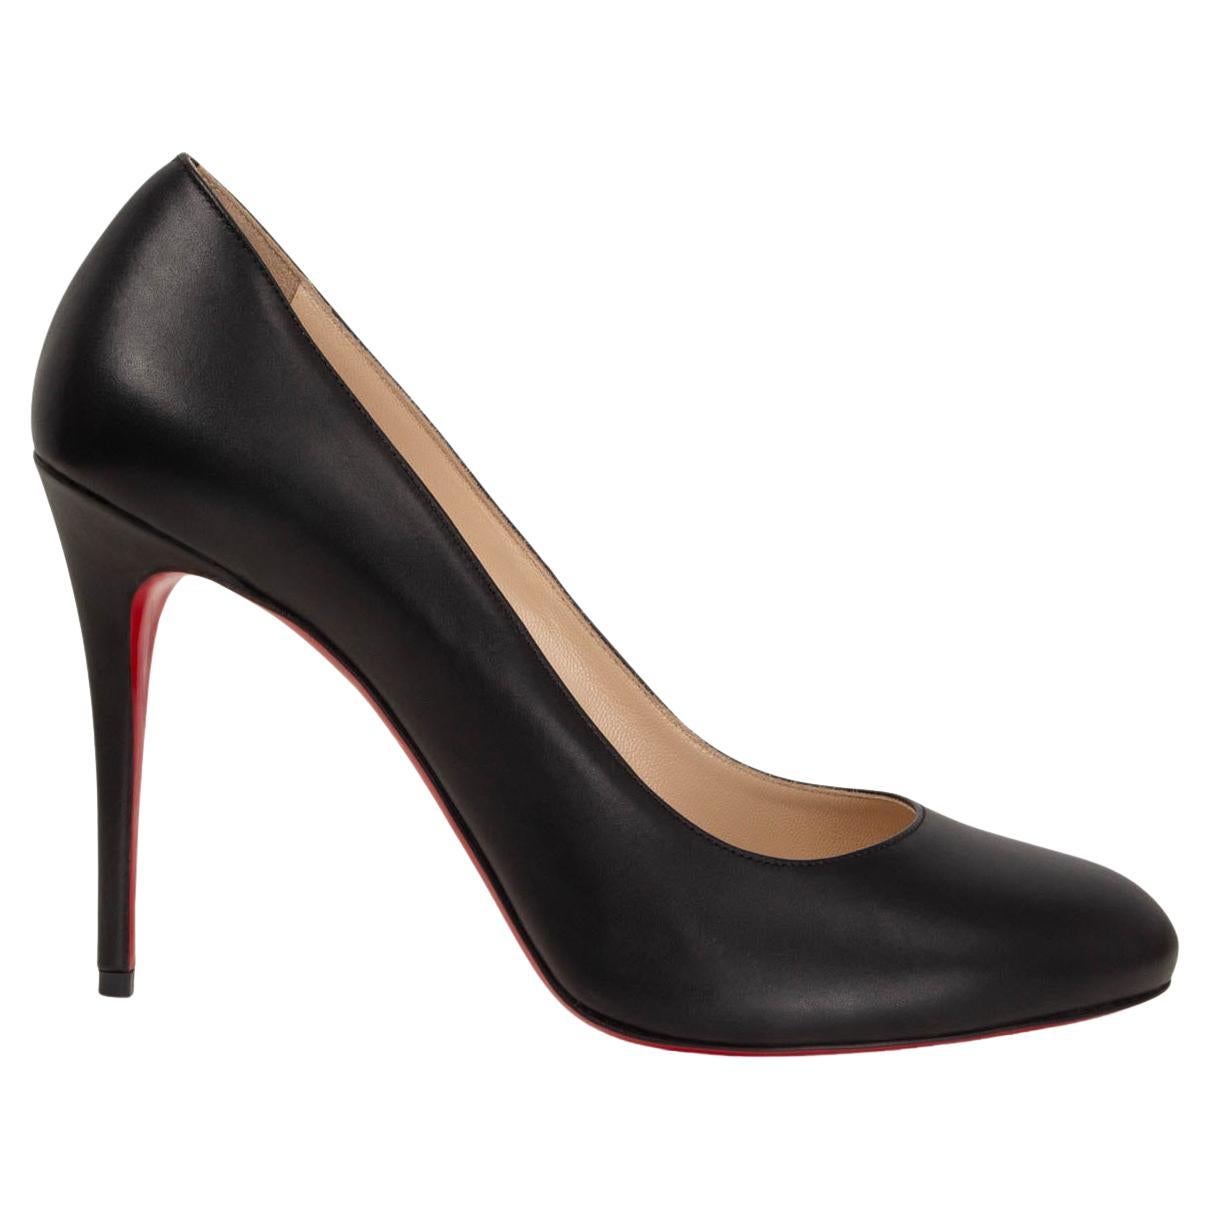 CHRISTIAN LOUBOUTIN black leather SIMPLE Pumps Shoes 38.5 For Sale